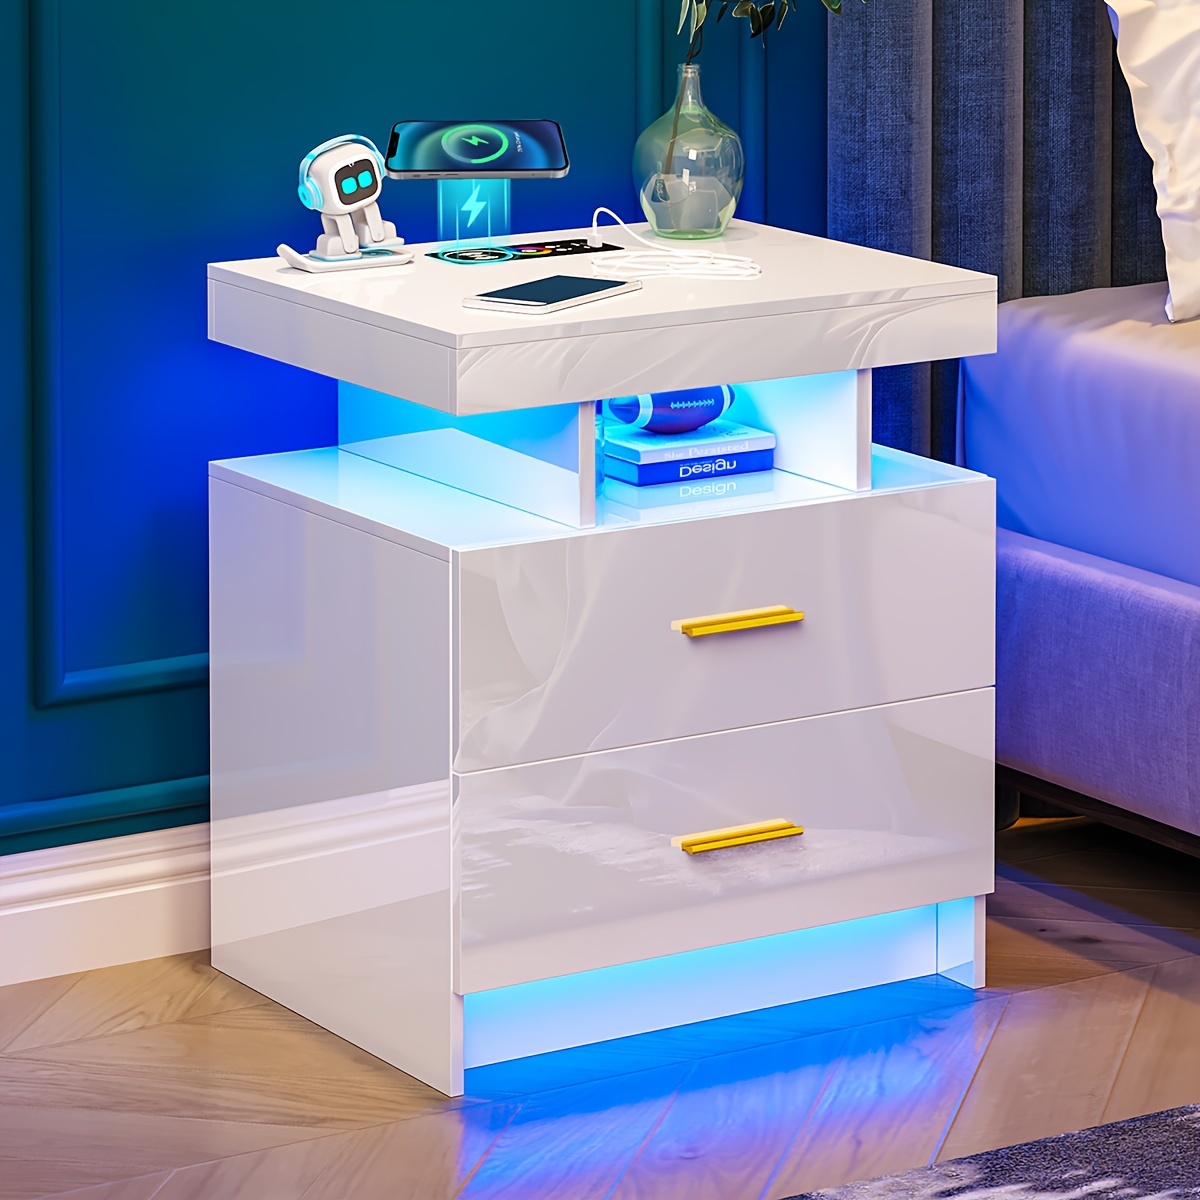 

Hnebc Led Nightstand, Rgb Night Stand With Usb/wireless Charging Station, Modern Bedside Table Has Auto Sensor Rgb Lights, End Side Table With 2 Drawer For Bedroom Furniture